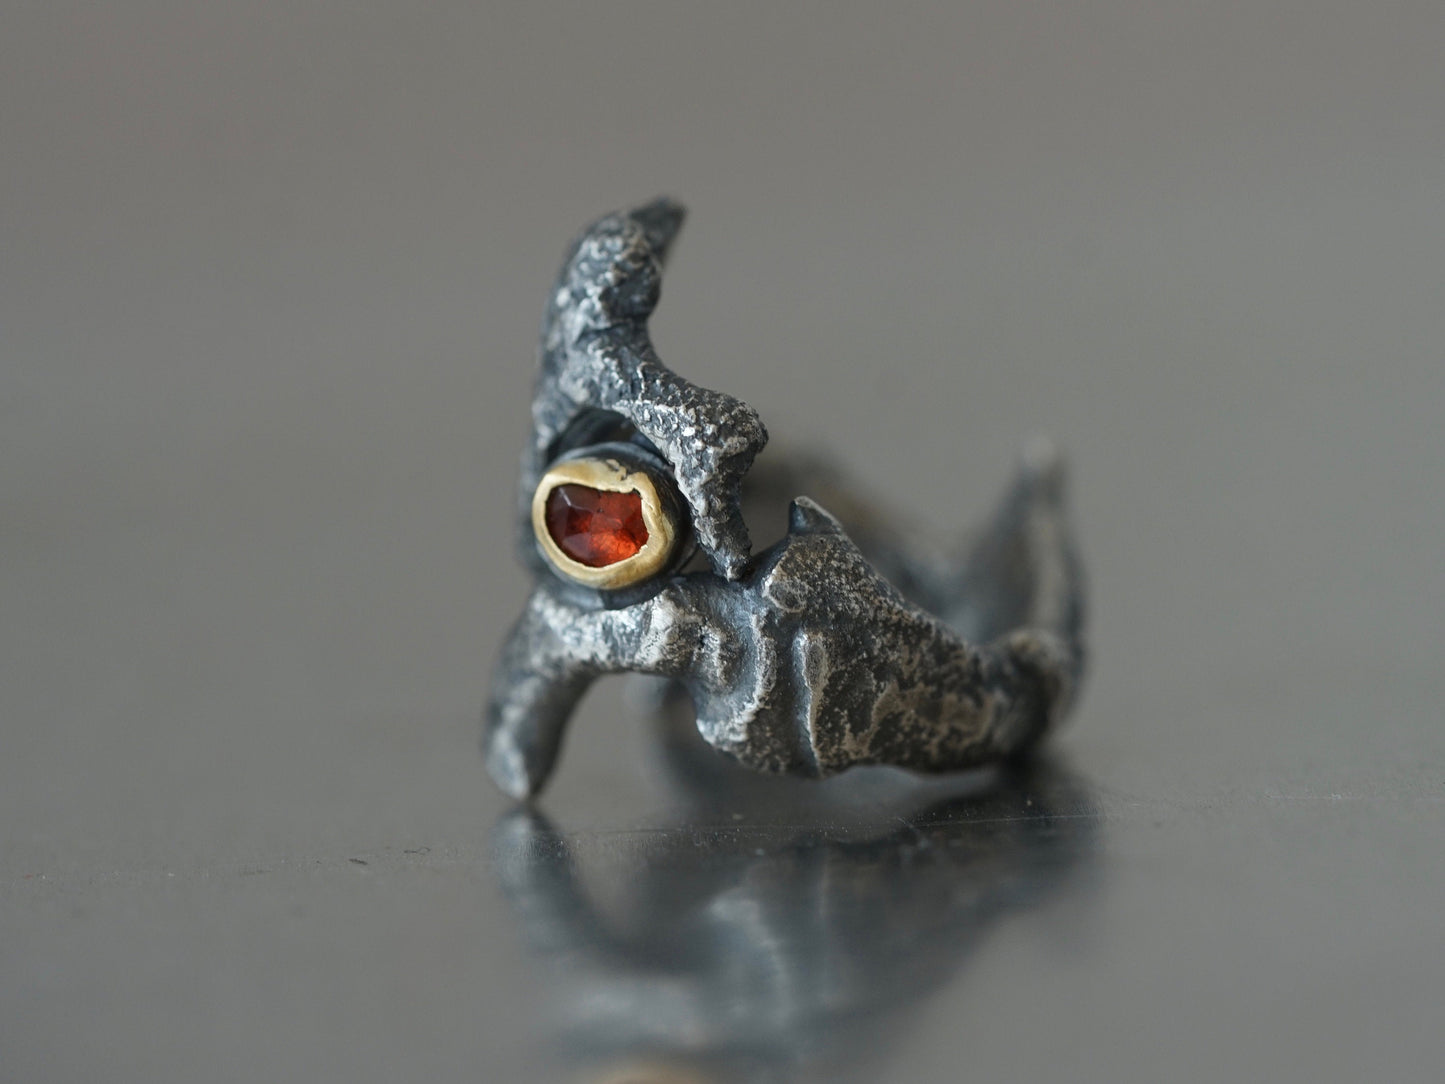 Dragon eye ring, red spinel and 22k gold, size 6.75